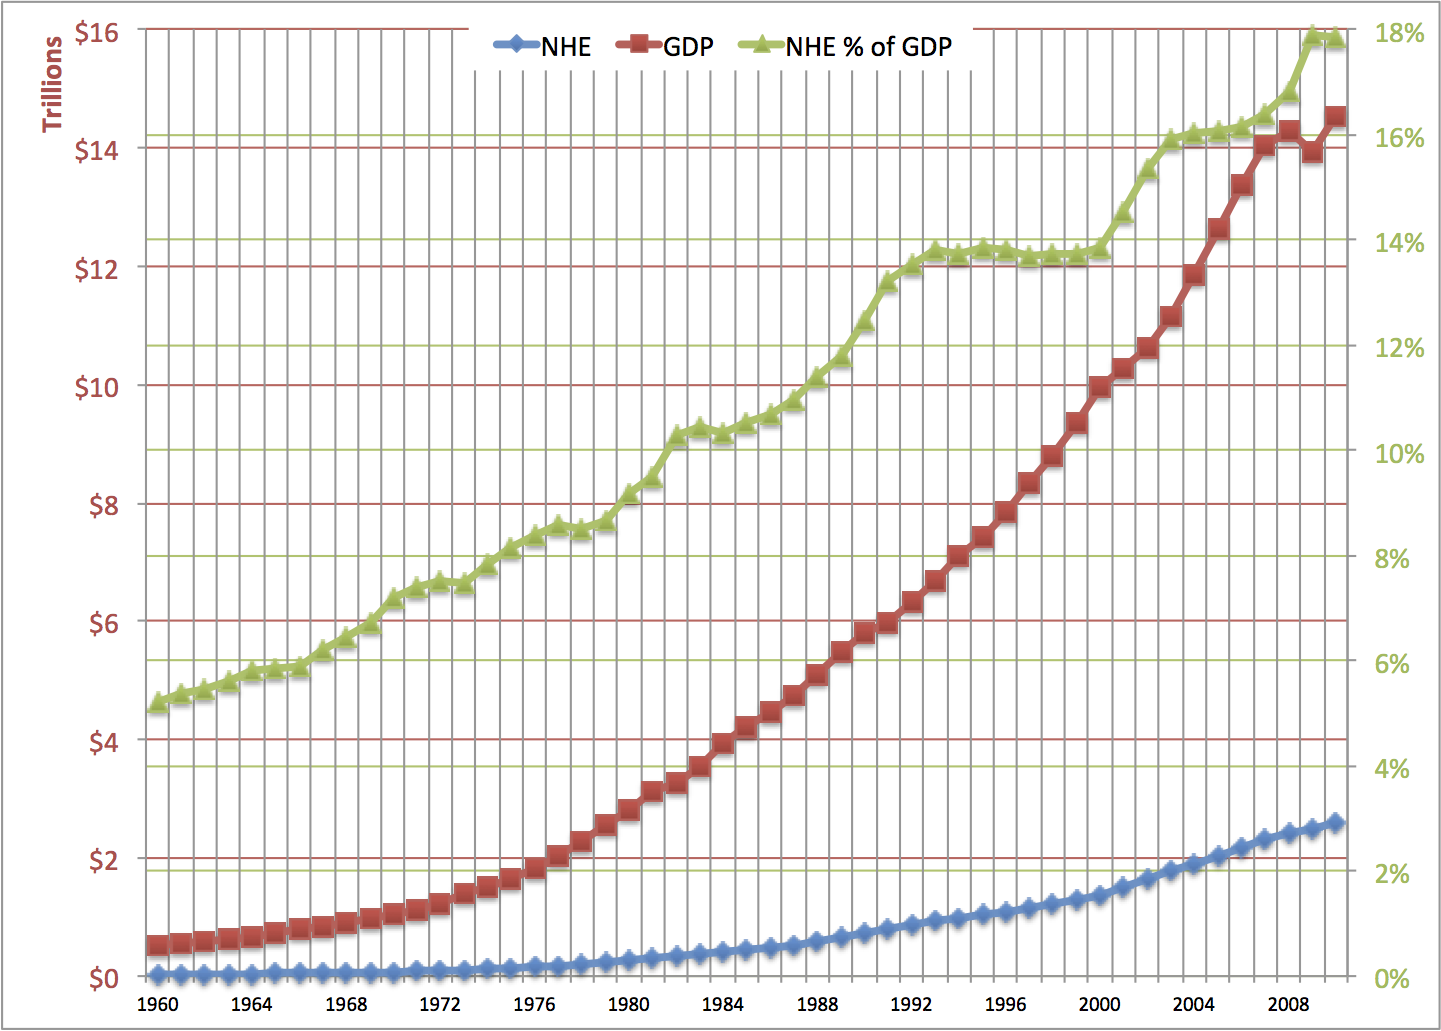 US health spending and GDP